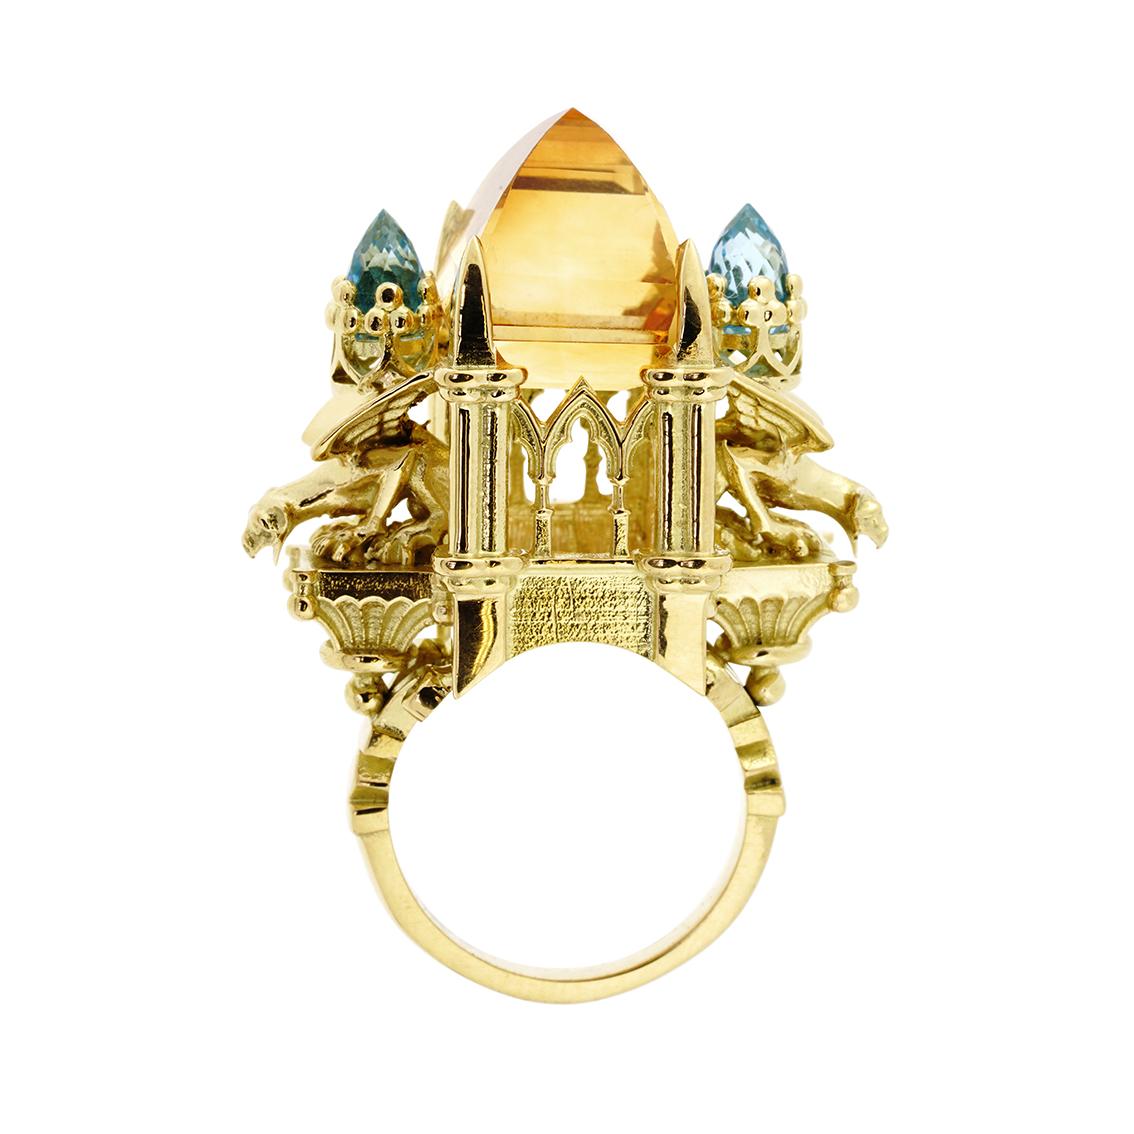 Gothic Revival 18 Karat Yellow Gold Citrine and Aquamarine Cathedral Ring